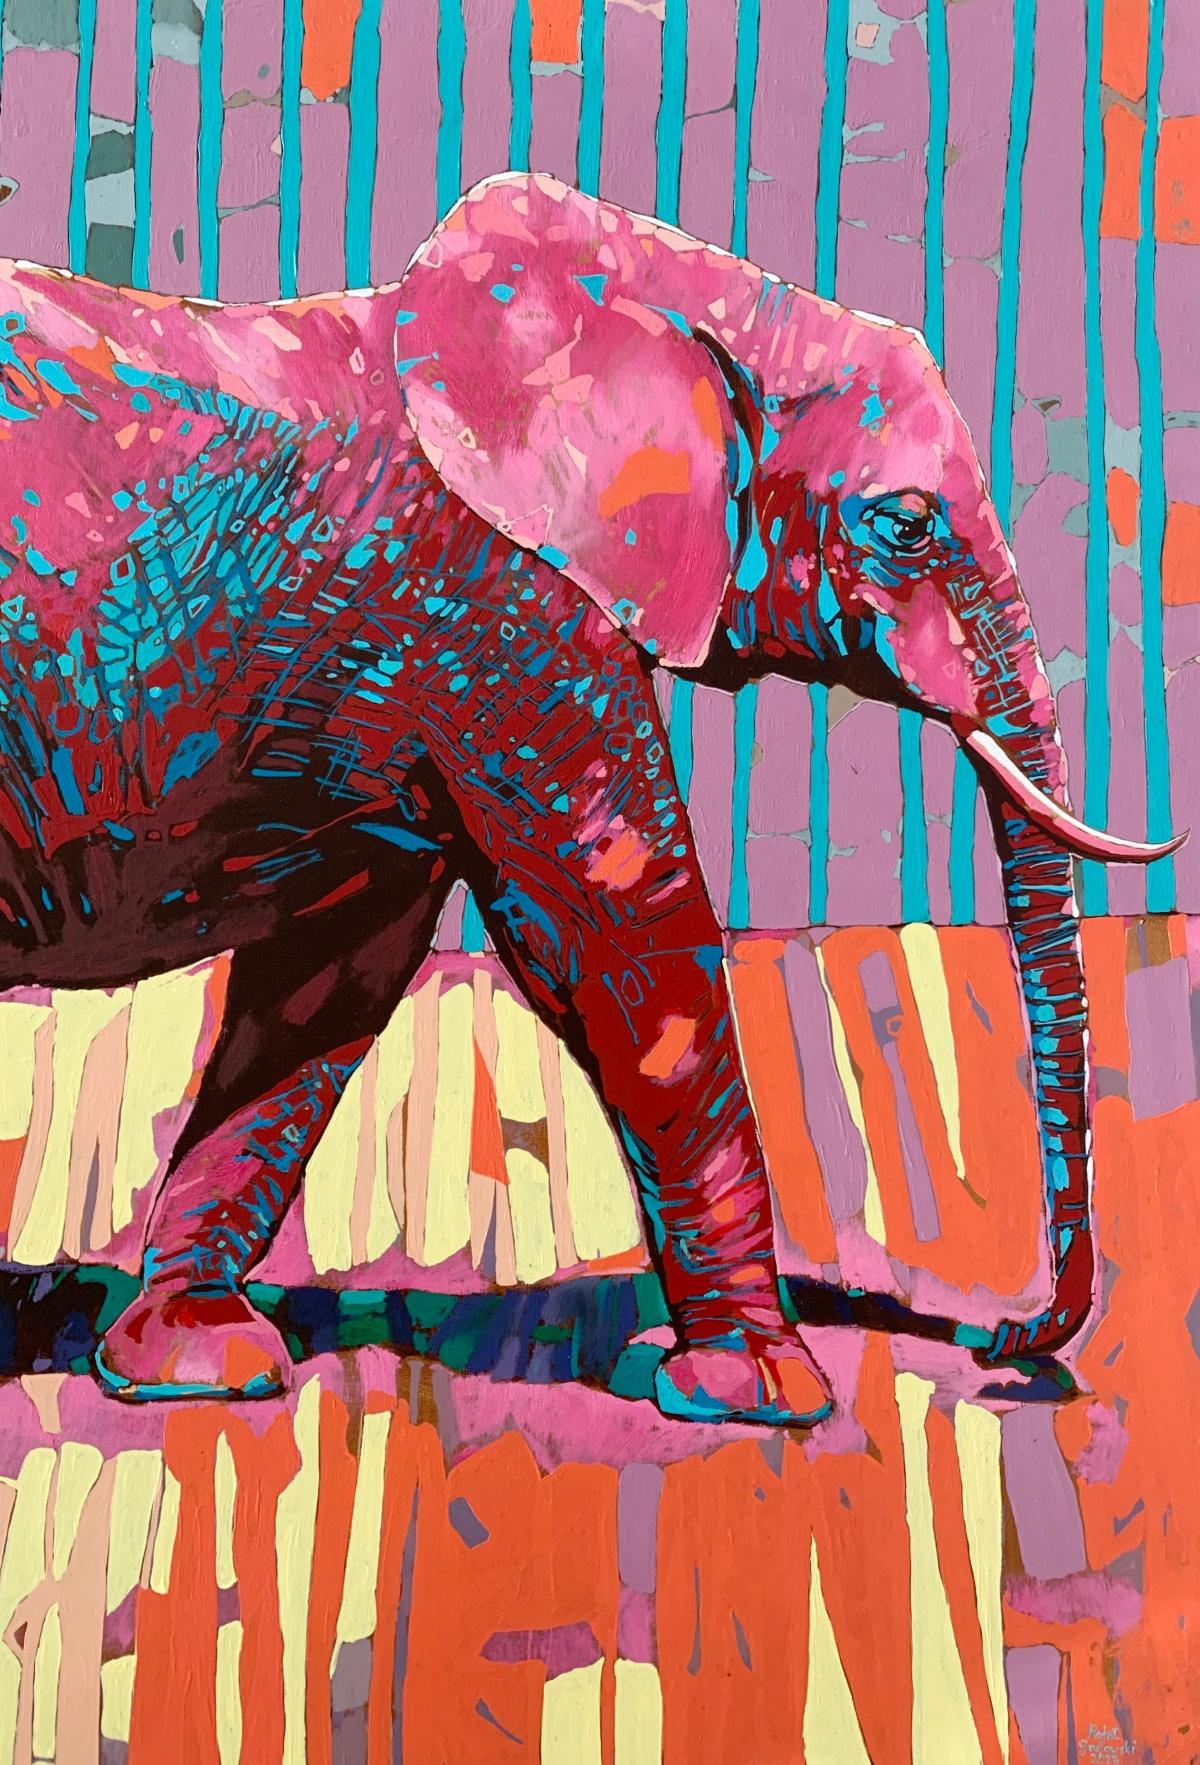 Contemporary figurative oil on canvas painting by Polish artist Rafal Gadowski. Painting in pop art style depicting an elephant. The background is geometric. Painting is both pastel and bright with many dynamic shapes. Title of this painting is 'An